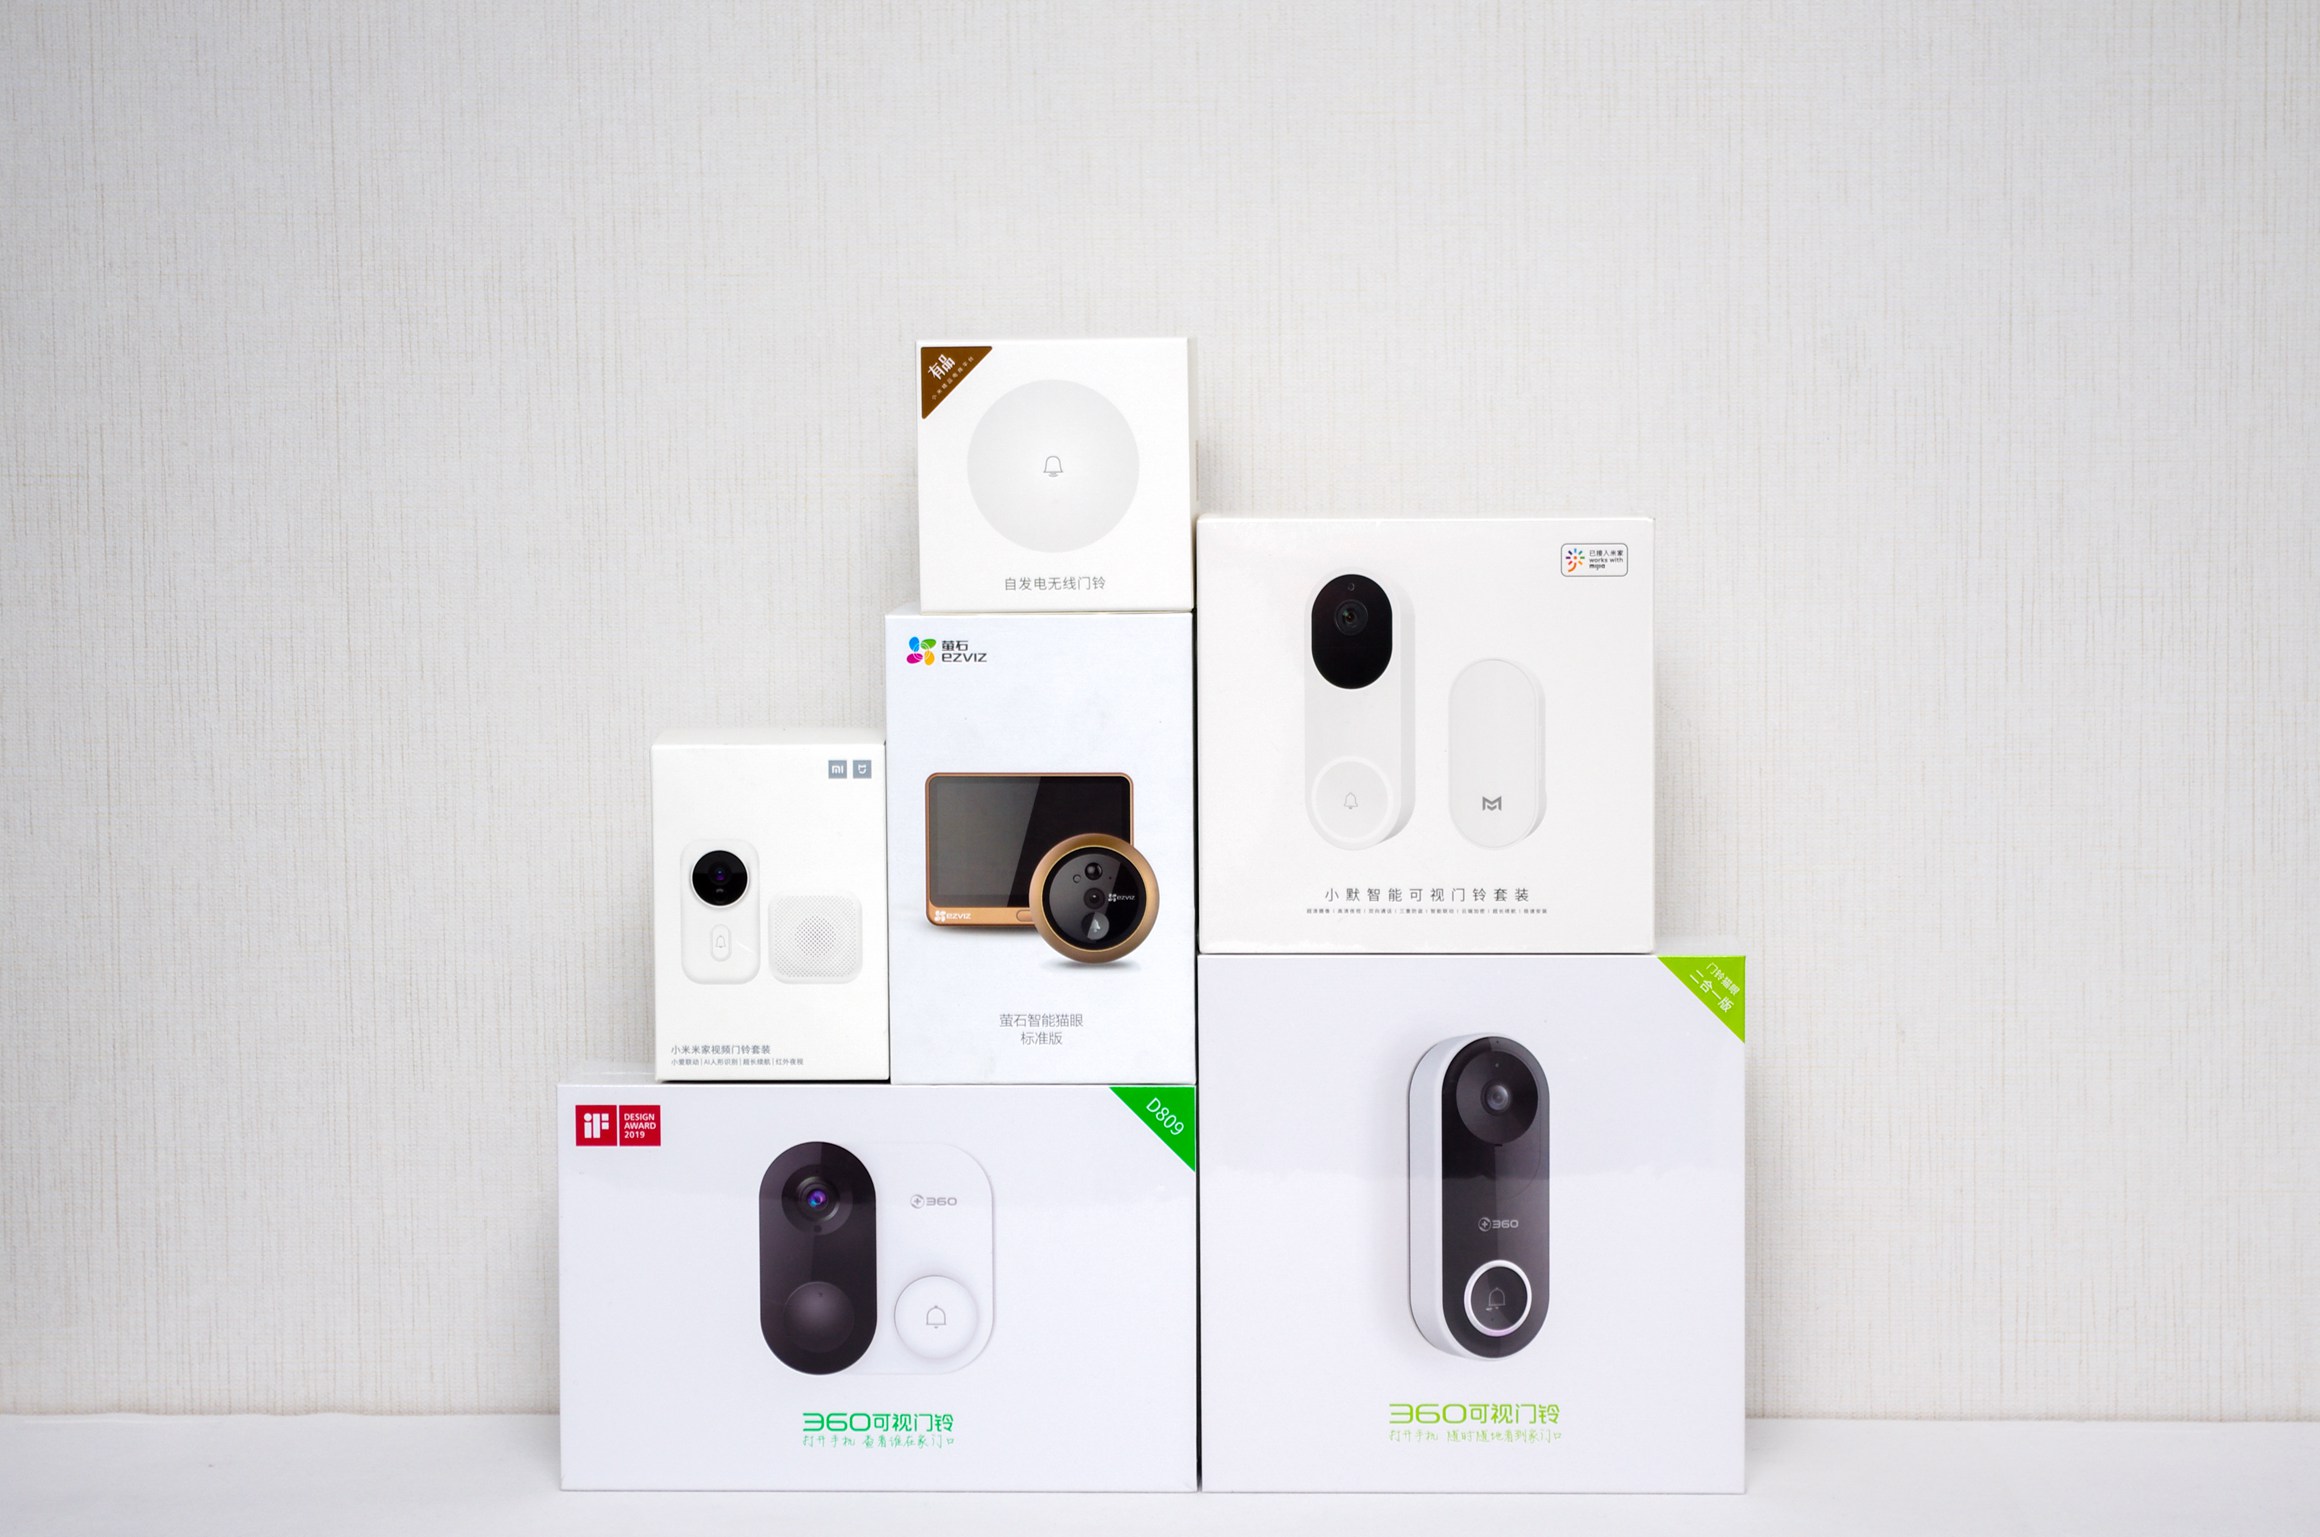 We tested six smart doorbells and found the best one